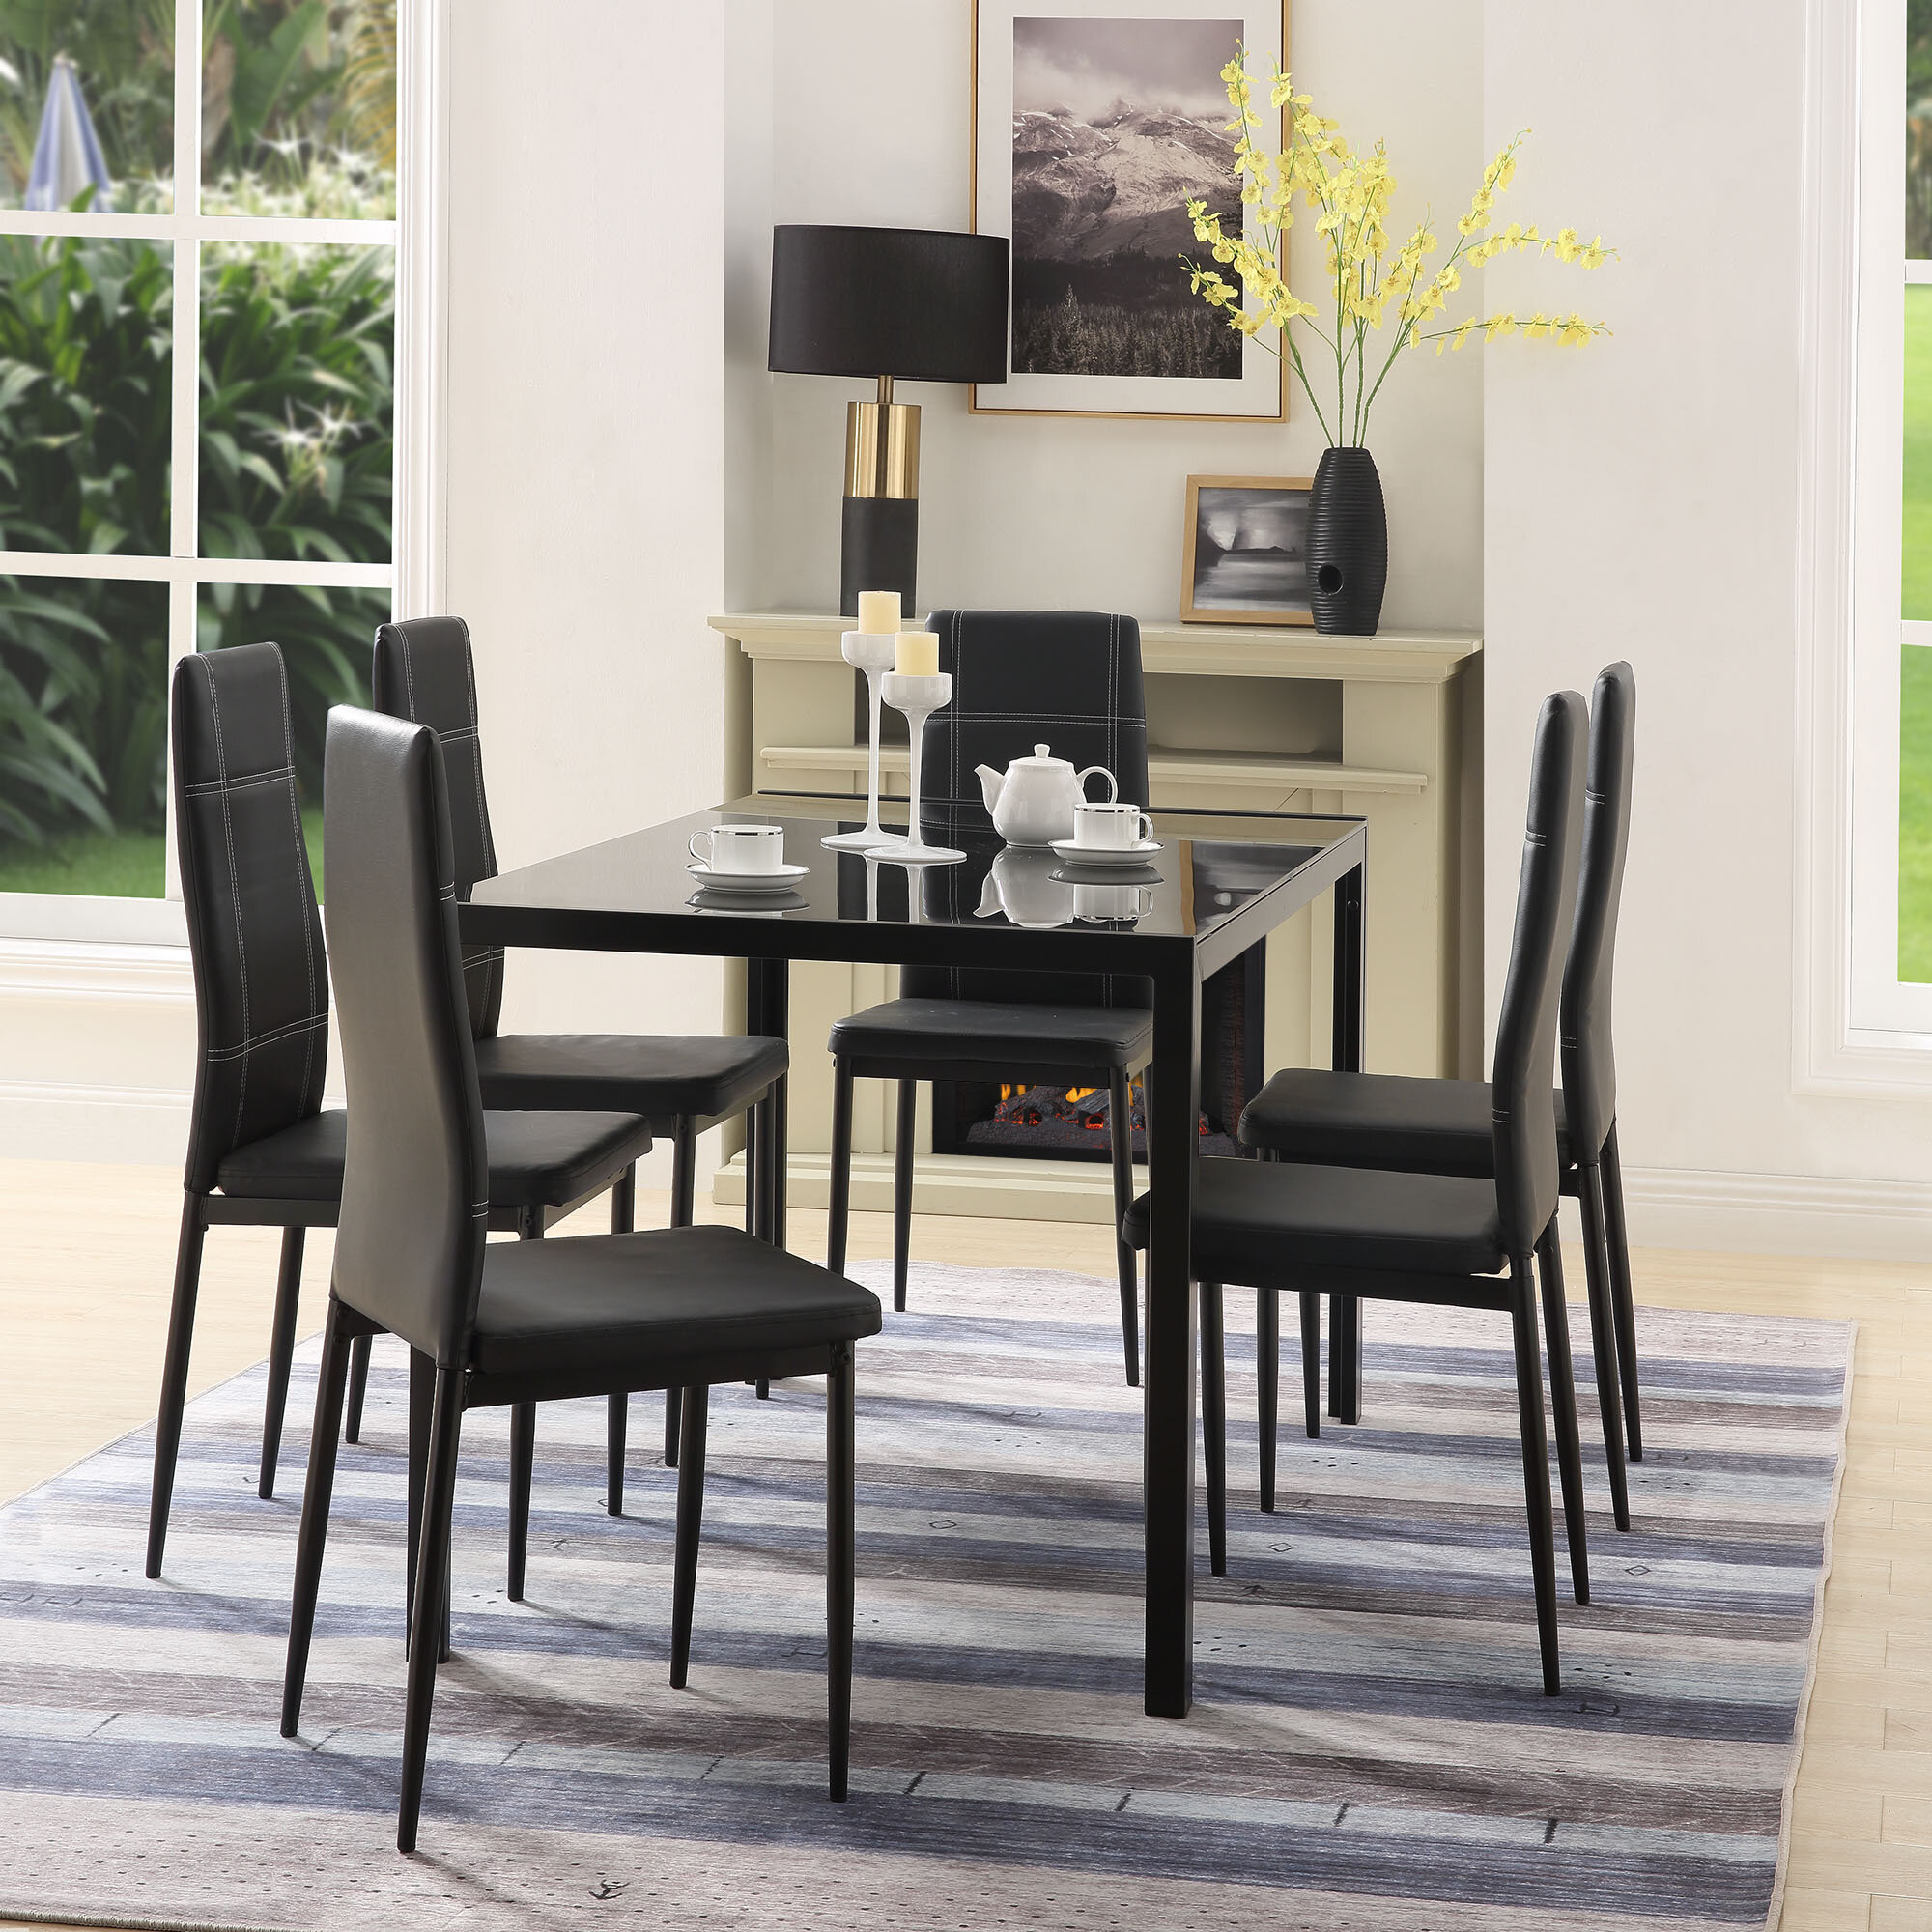 Havertys Dining Room Sets - Refundable Havertys Kitchen Table Avondale